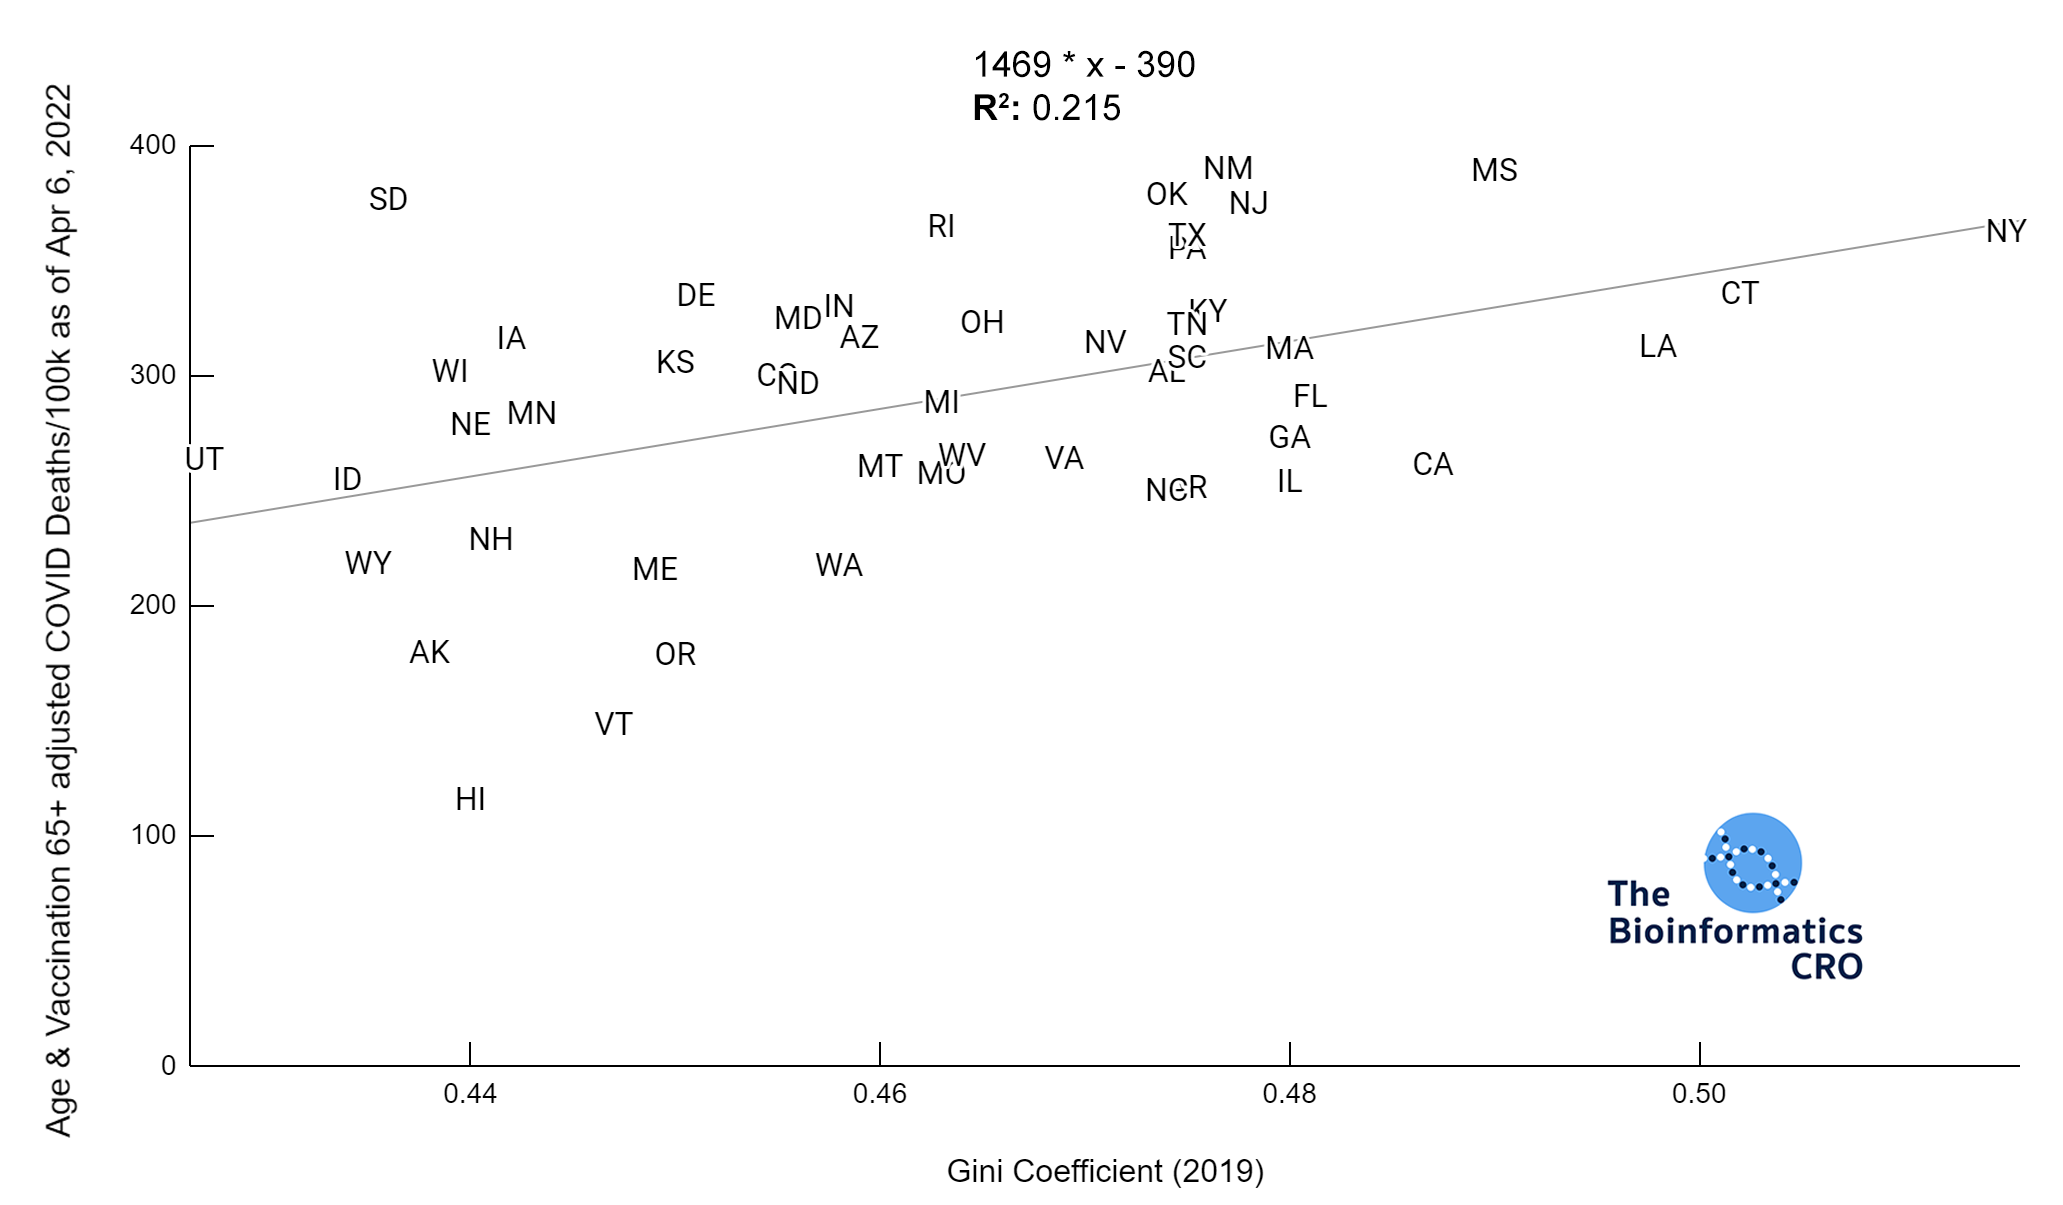 Age & Vaccinated Over 65 adjusted COVID Deaths versus Gini Coefficient 2019 | y = 1469 * x - 390 | R^2 = 0.215